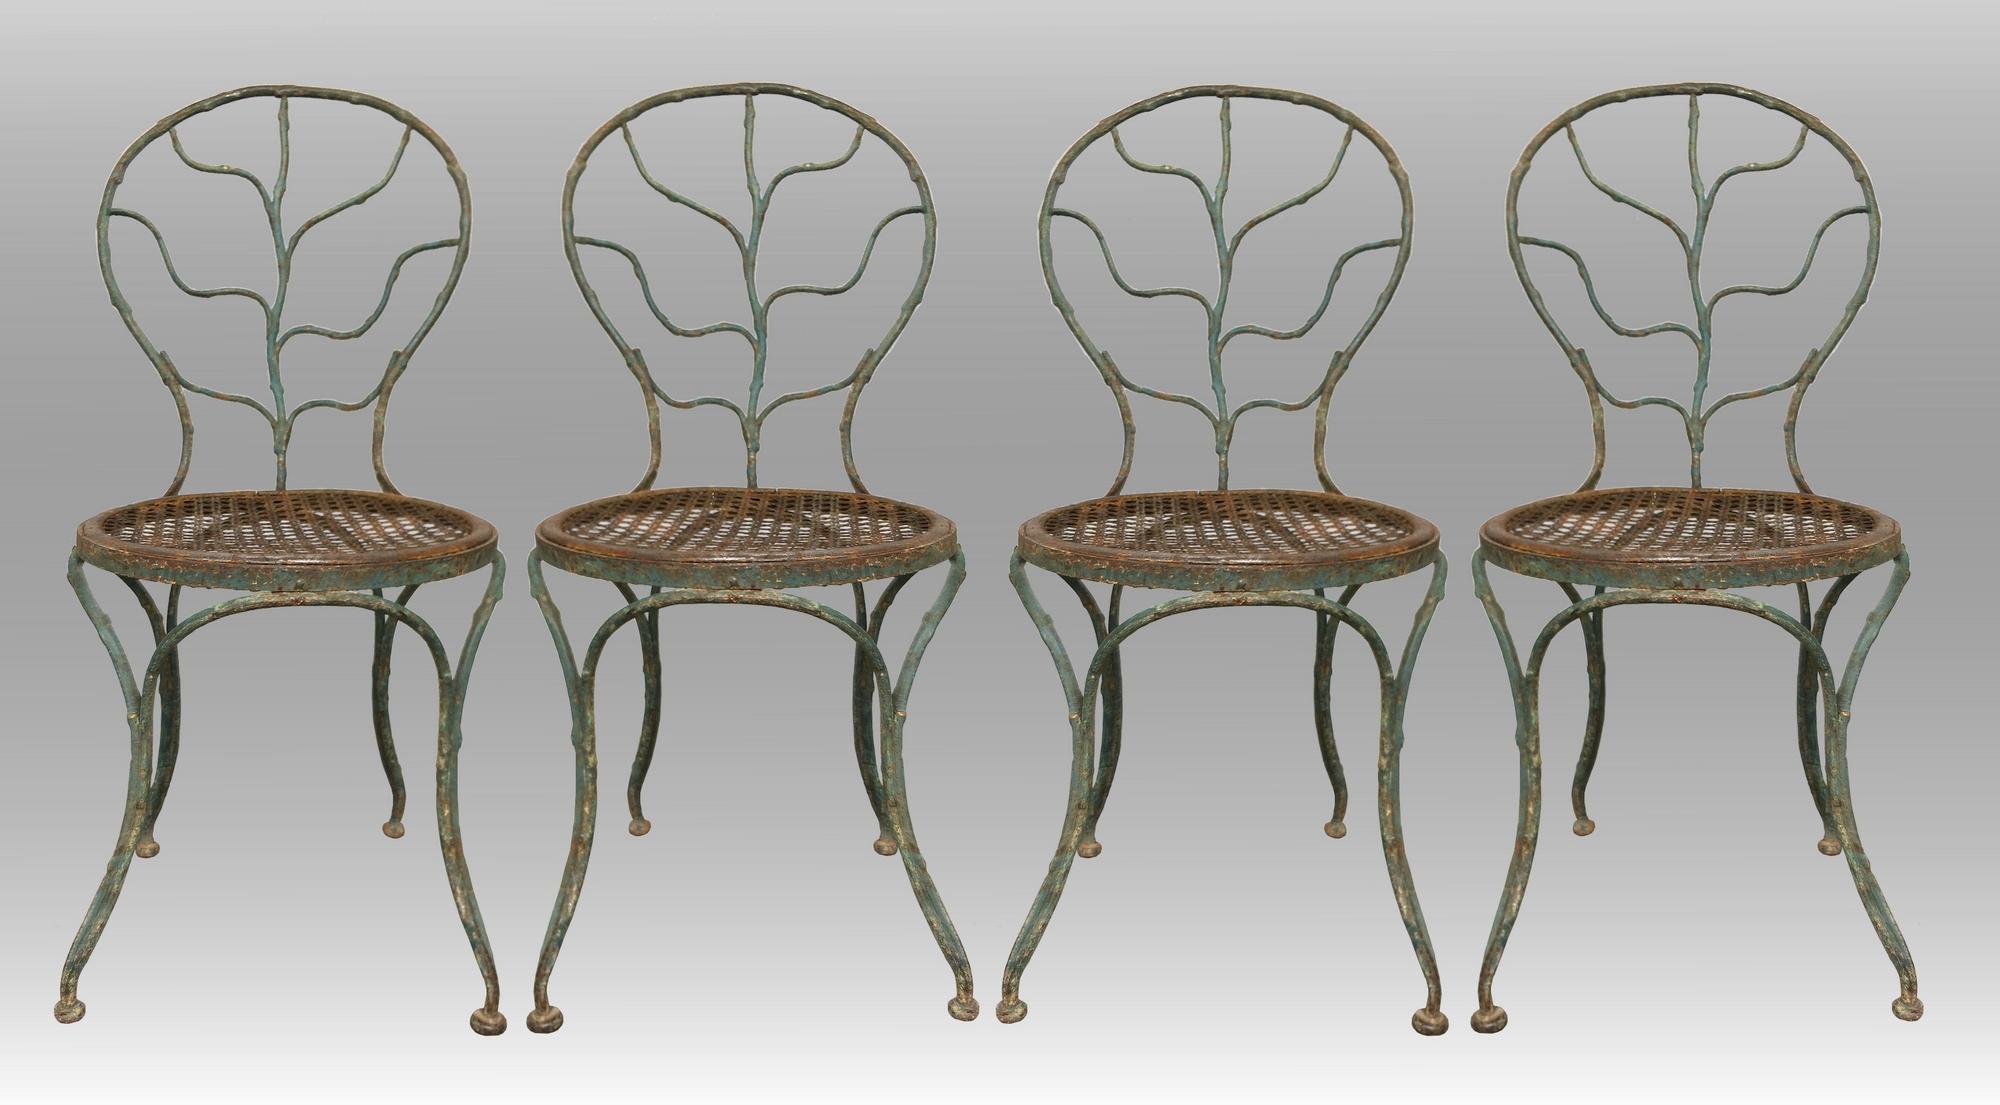 Jean-Michel Frank (1893-1941)
Four garden chair in worked cast iron of Durenne foundries, like thorny branches with a hollowed-out rounded backrest with three stems tied at their center on four arched legs forming a belt. Round seat bottom in steel